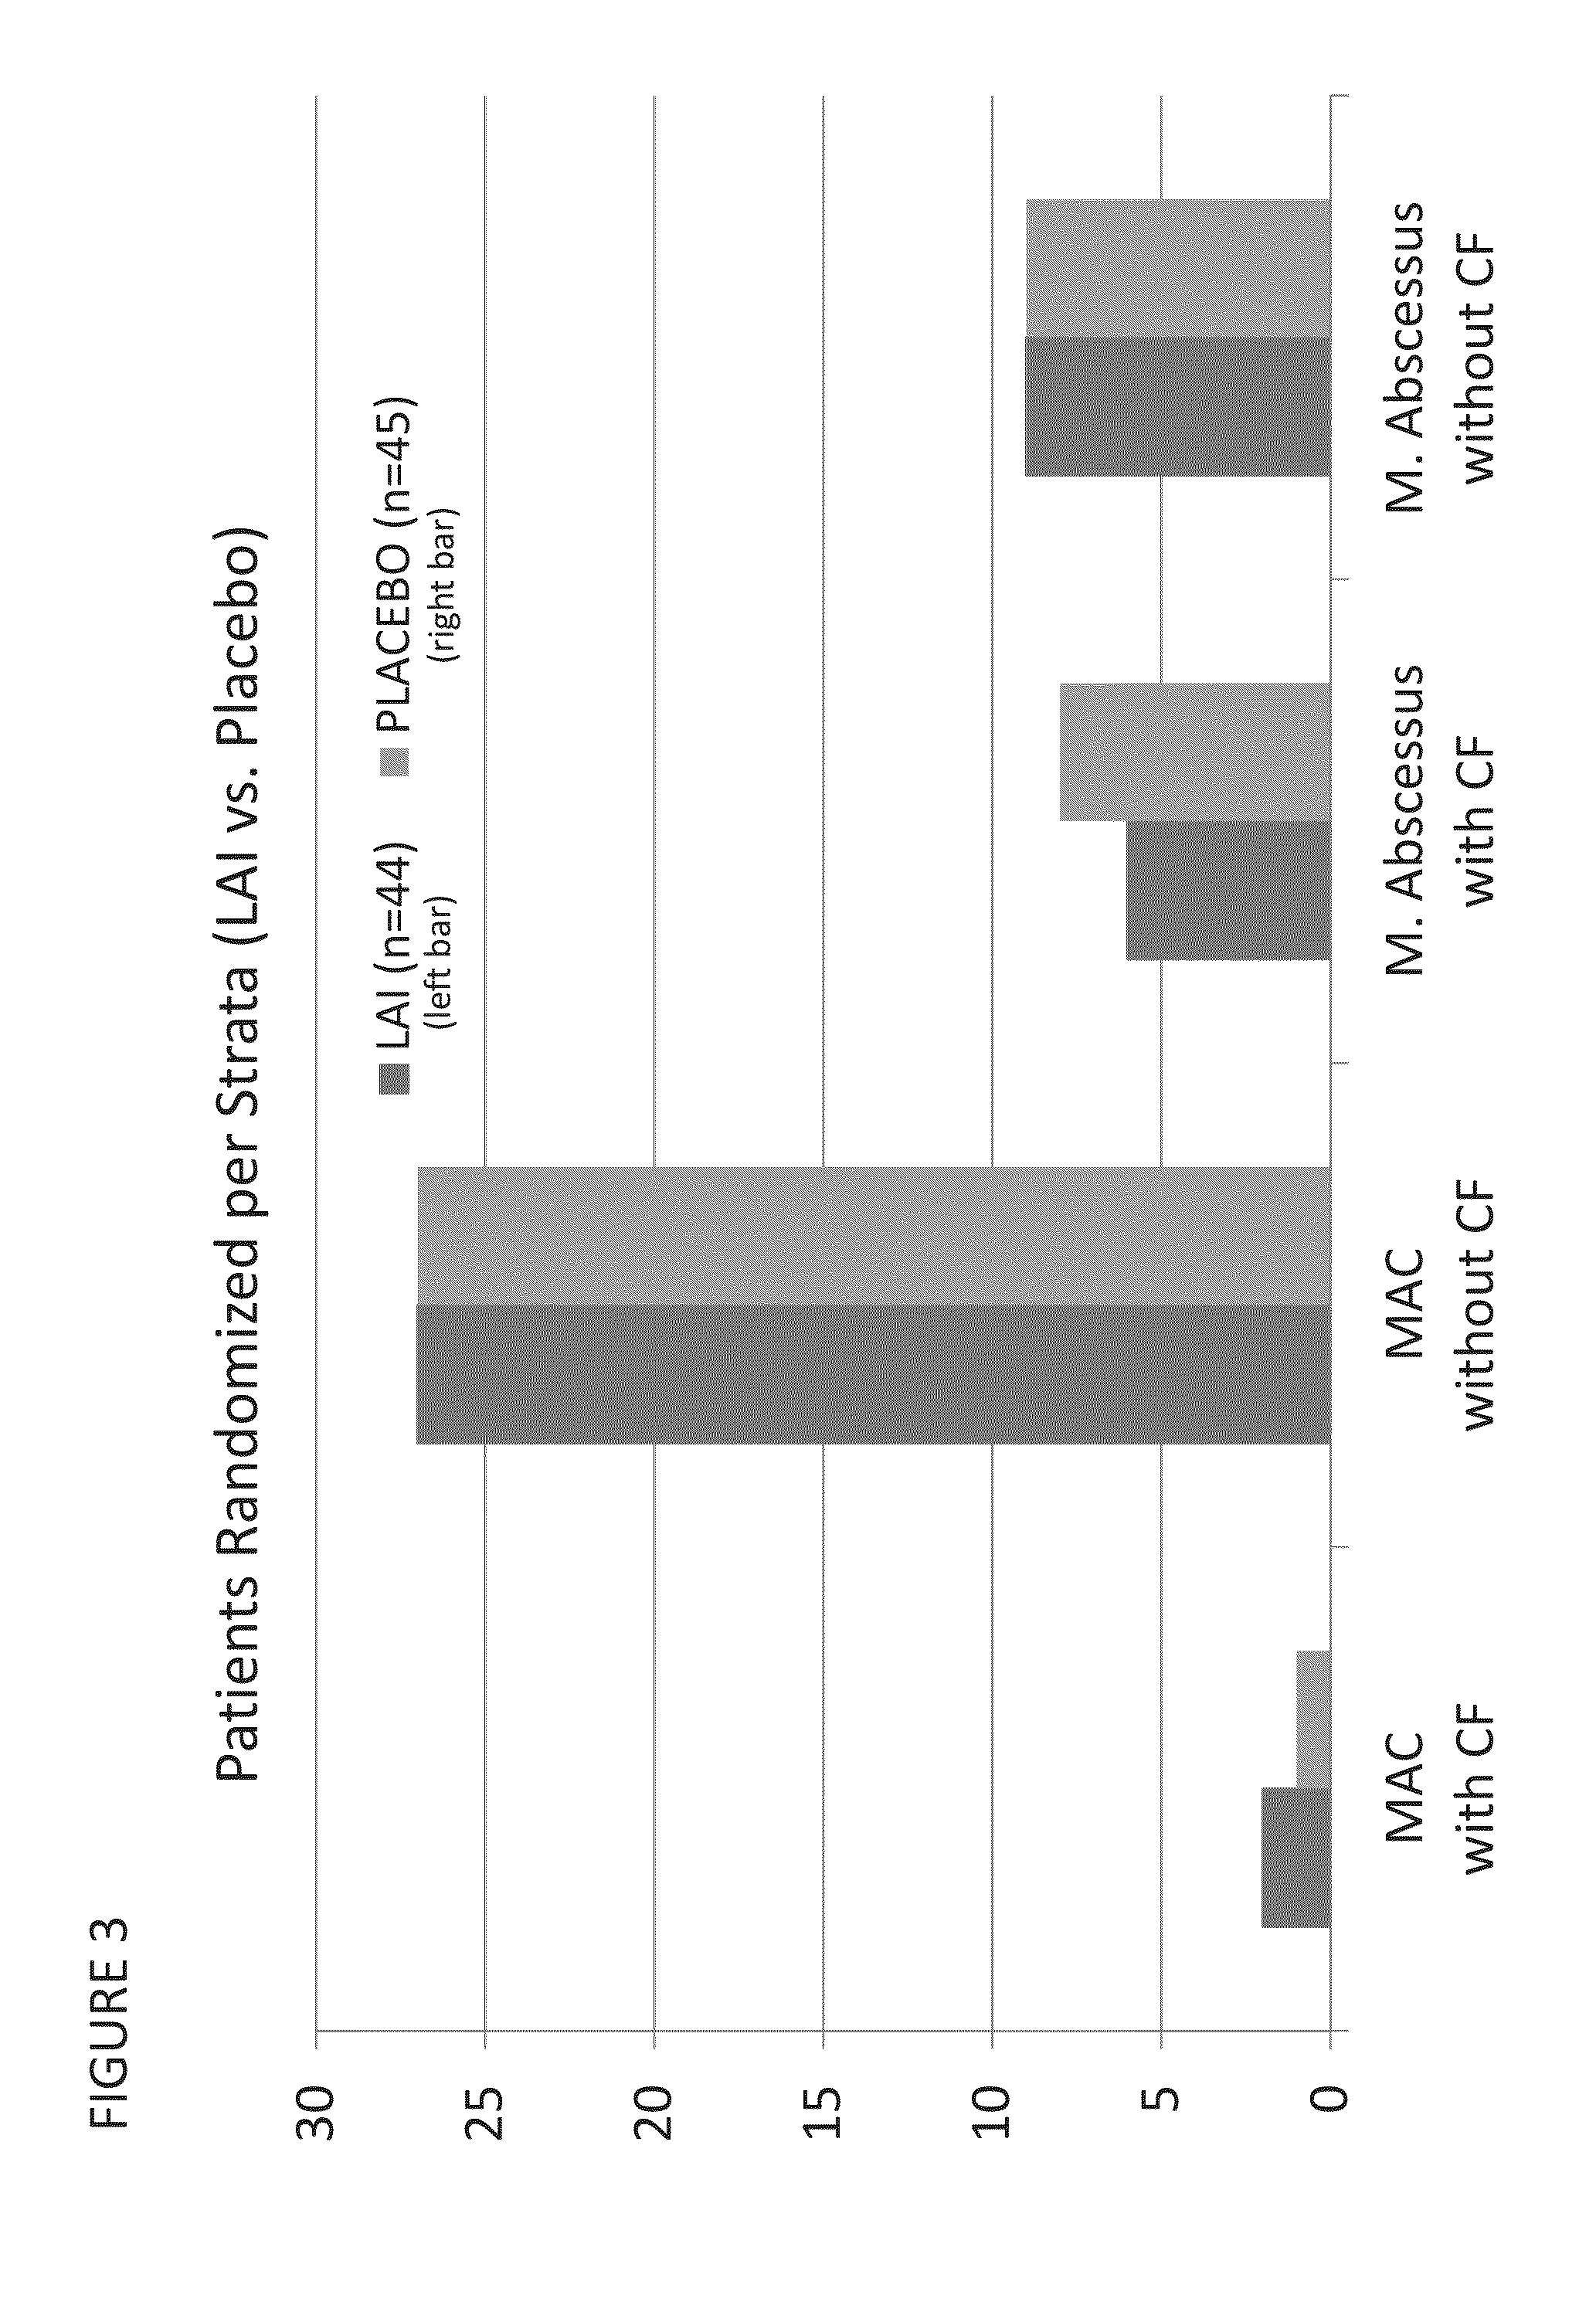 Methods for treating pulmonary non-tuberculous mycobacterial infections